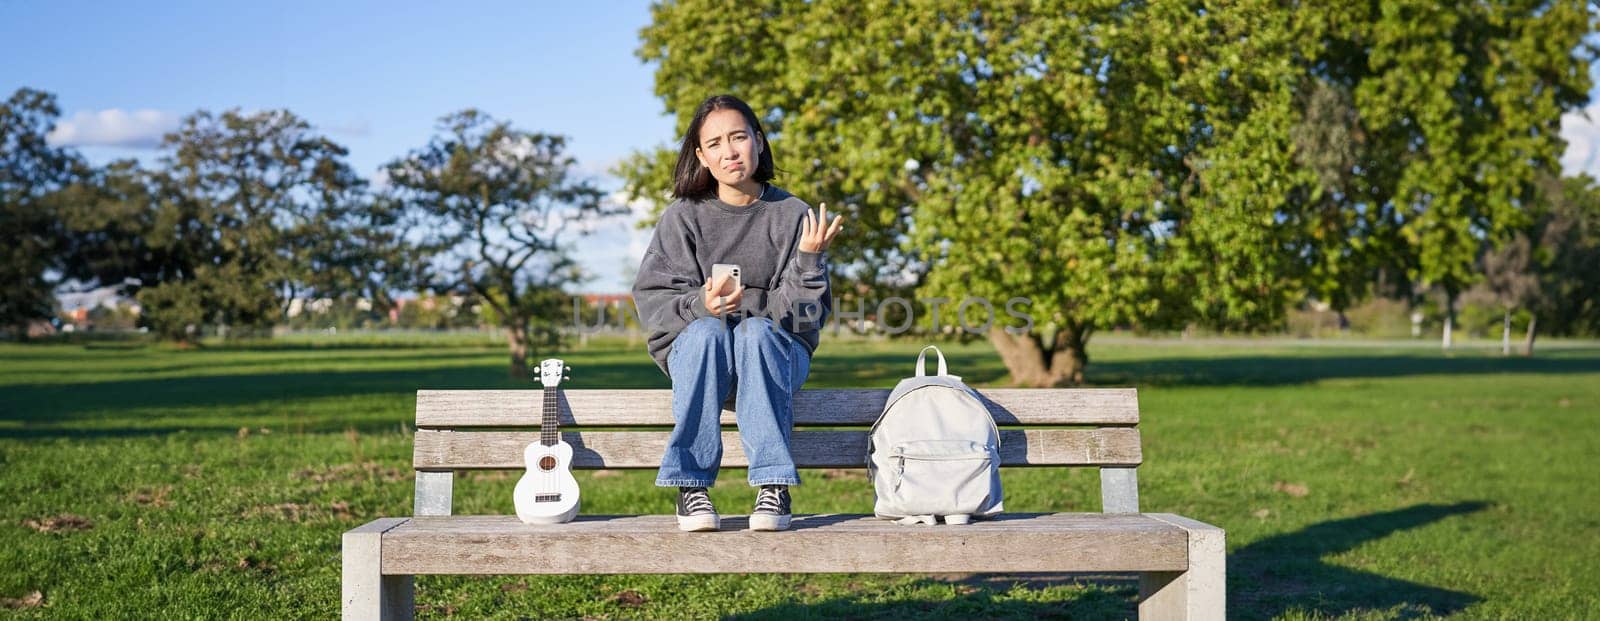 Girl with sad face, sitting on bench with smartphone and ukulele, looking upset and disappointed, being alone in park.